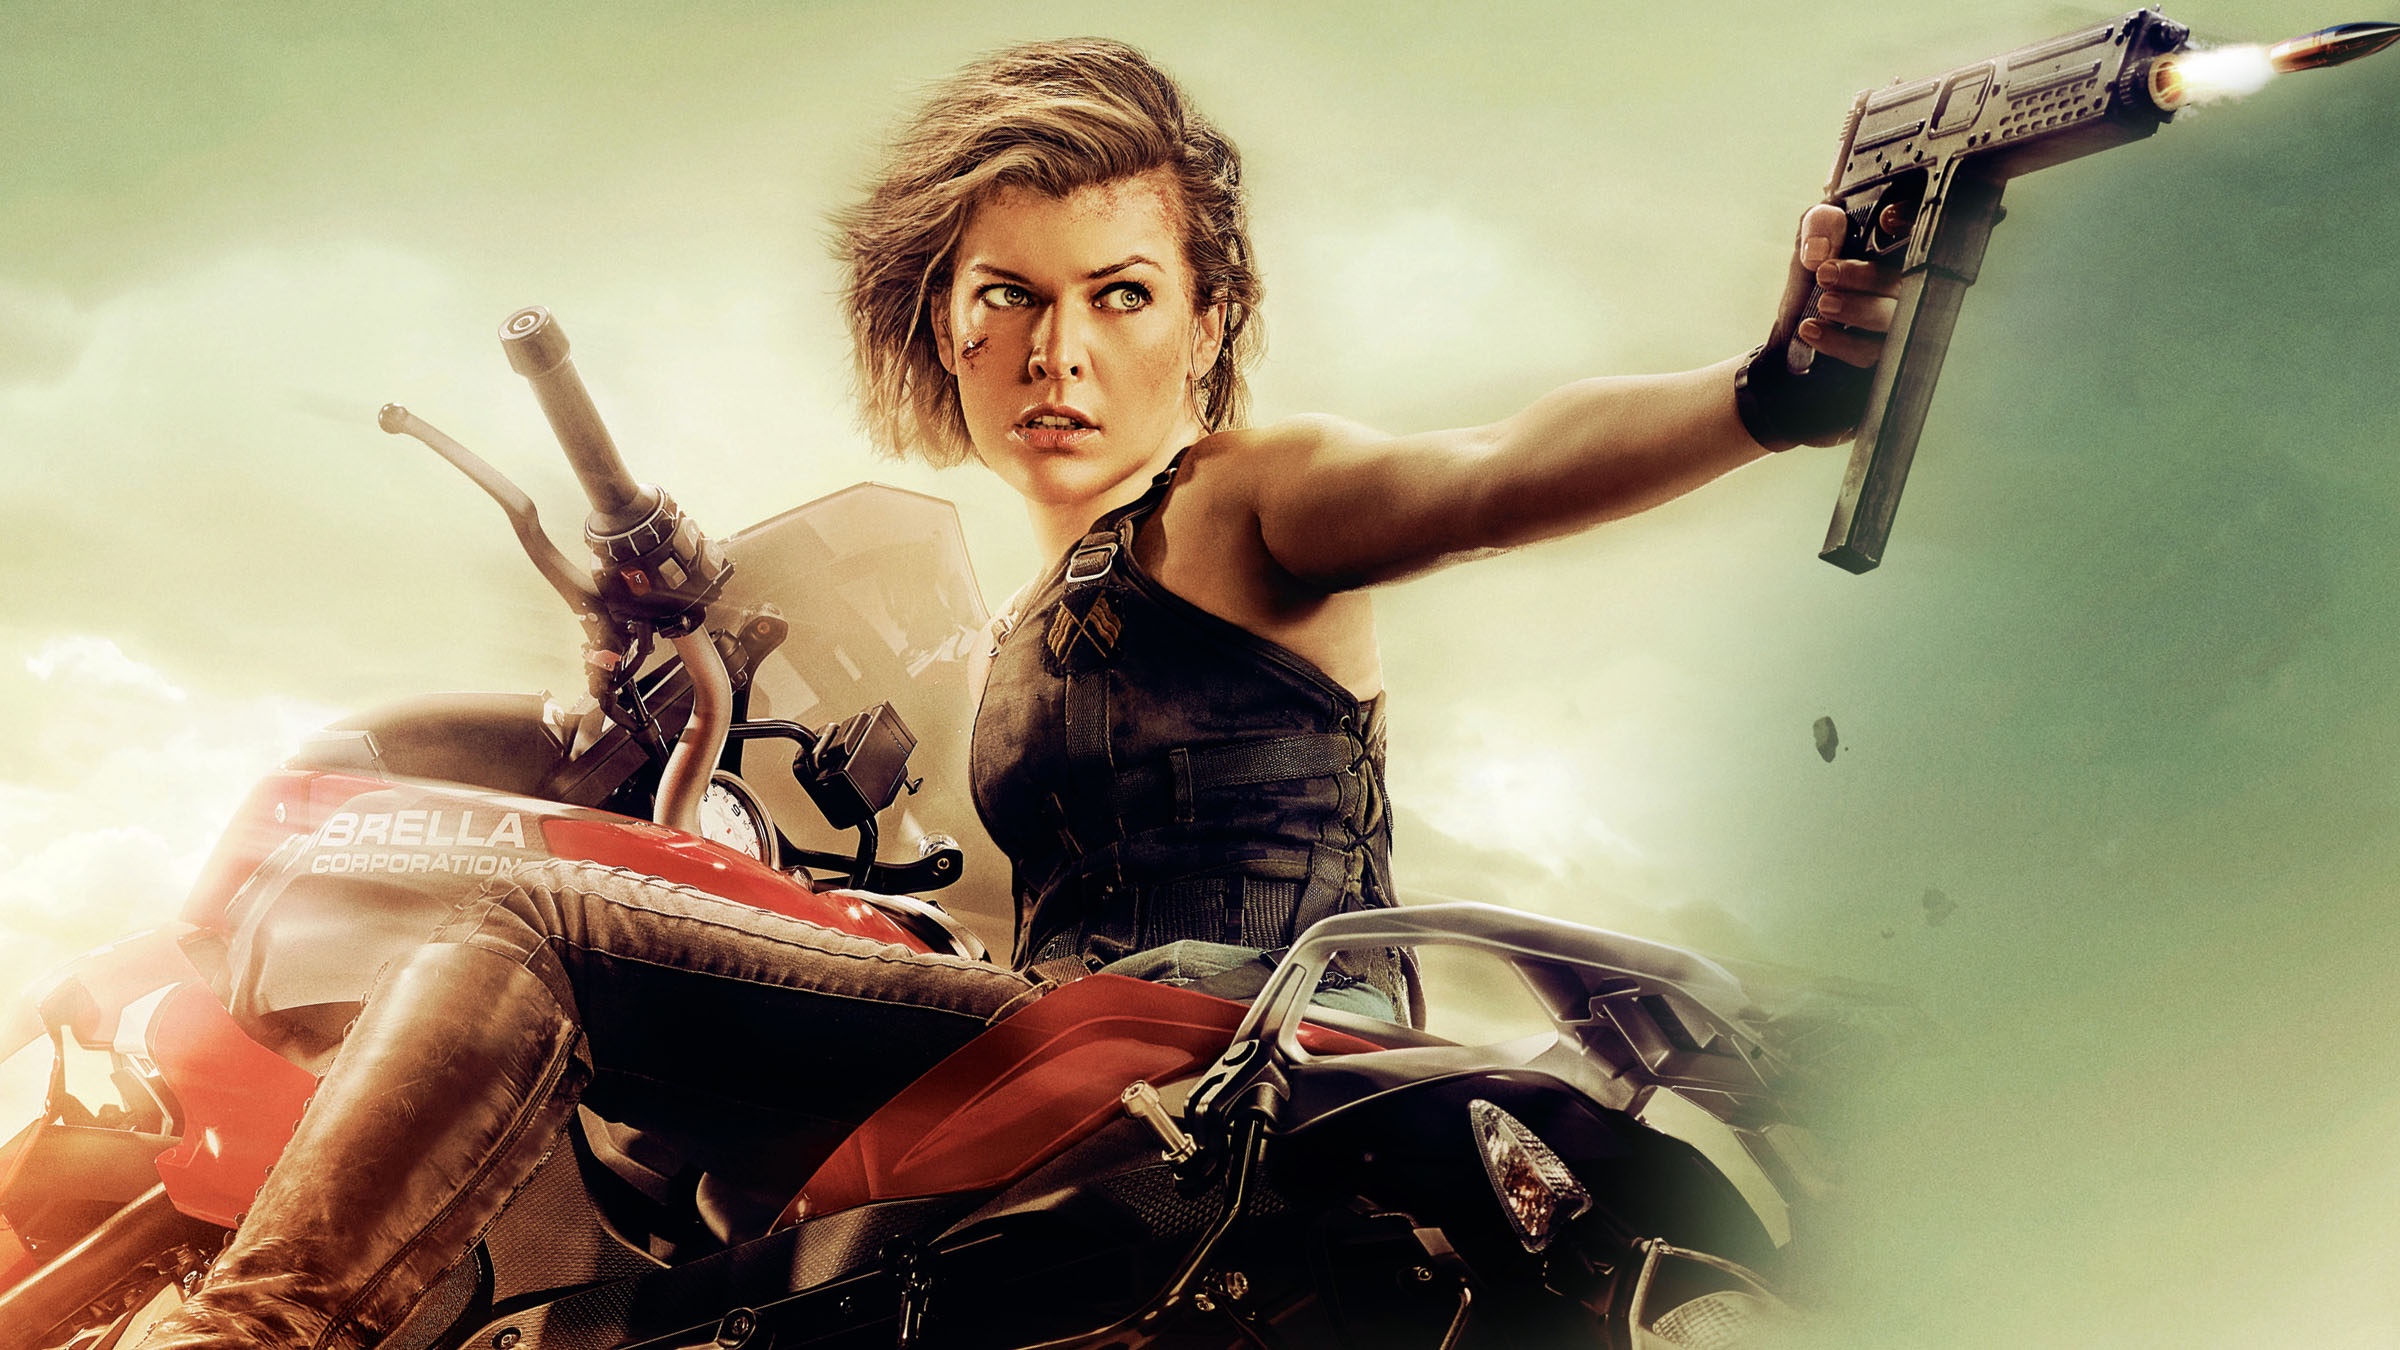 Fan made poster for Resident Evil: The Final Chapter, Claire Redfield, Ali Larter